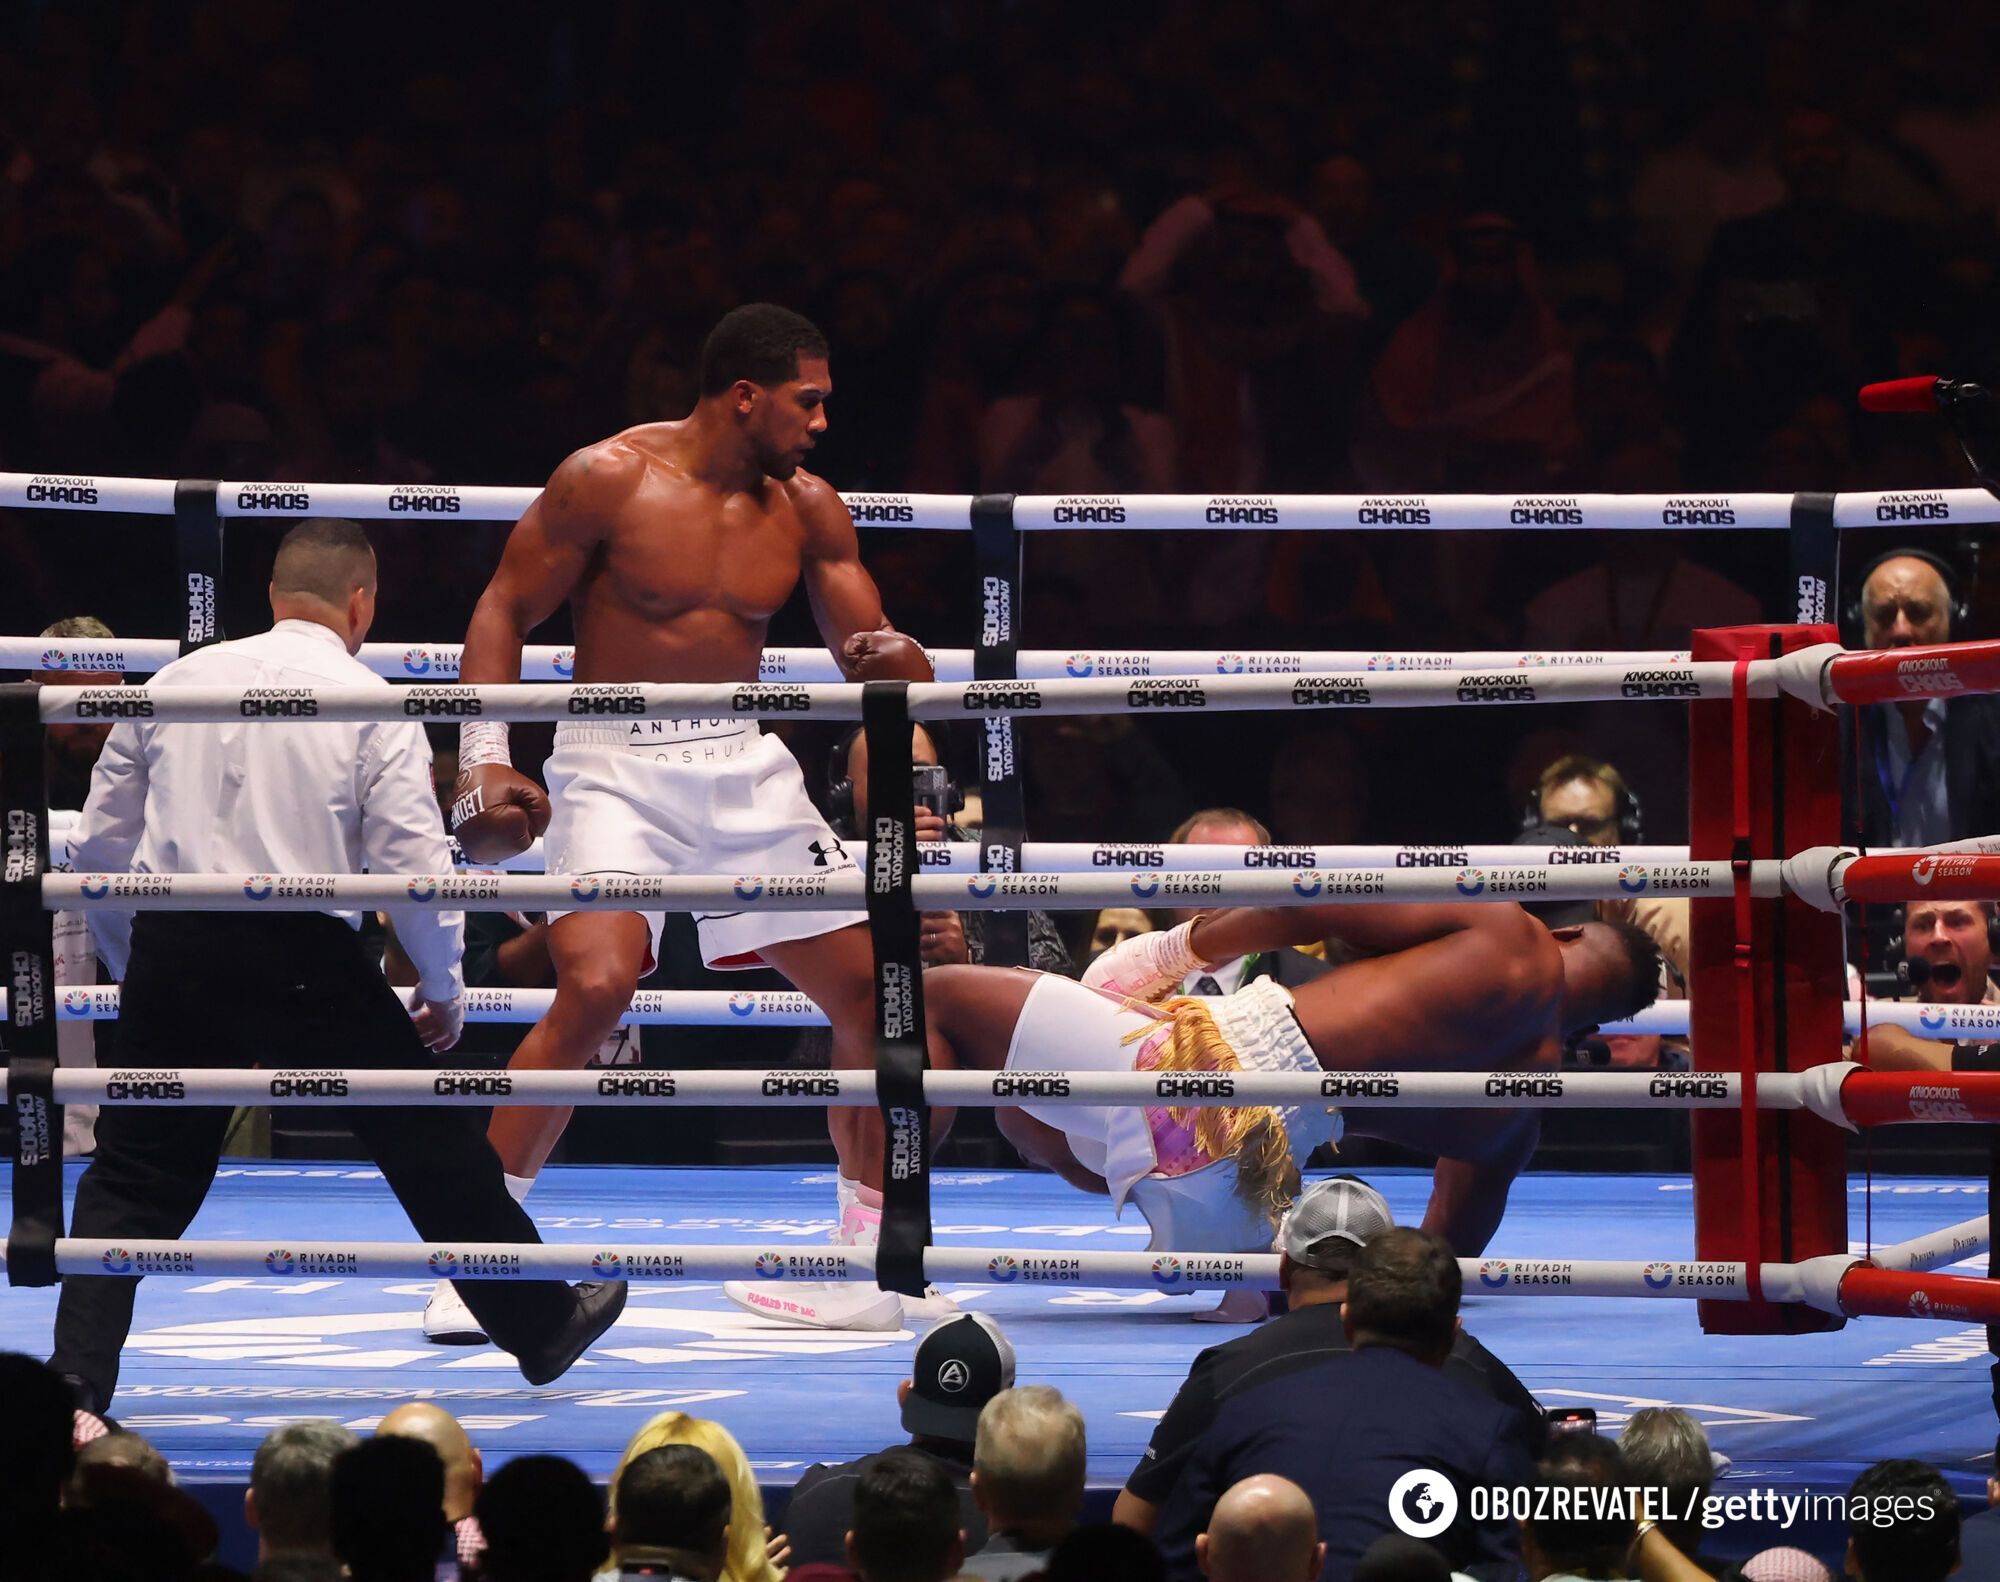 Knockout in one punch. The undefeated boxer sensationally lost in the 1st round on the Joshua-Ngannou undercard. Video